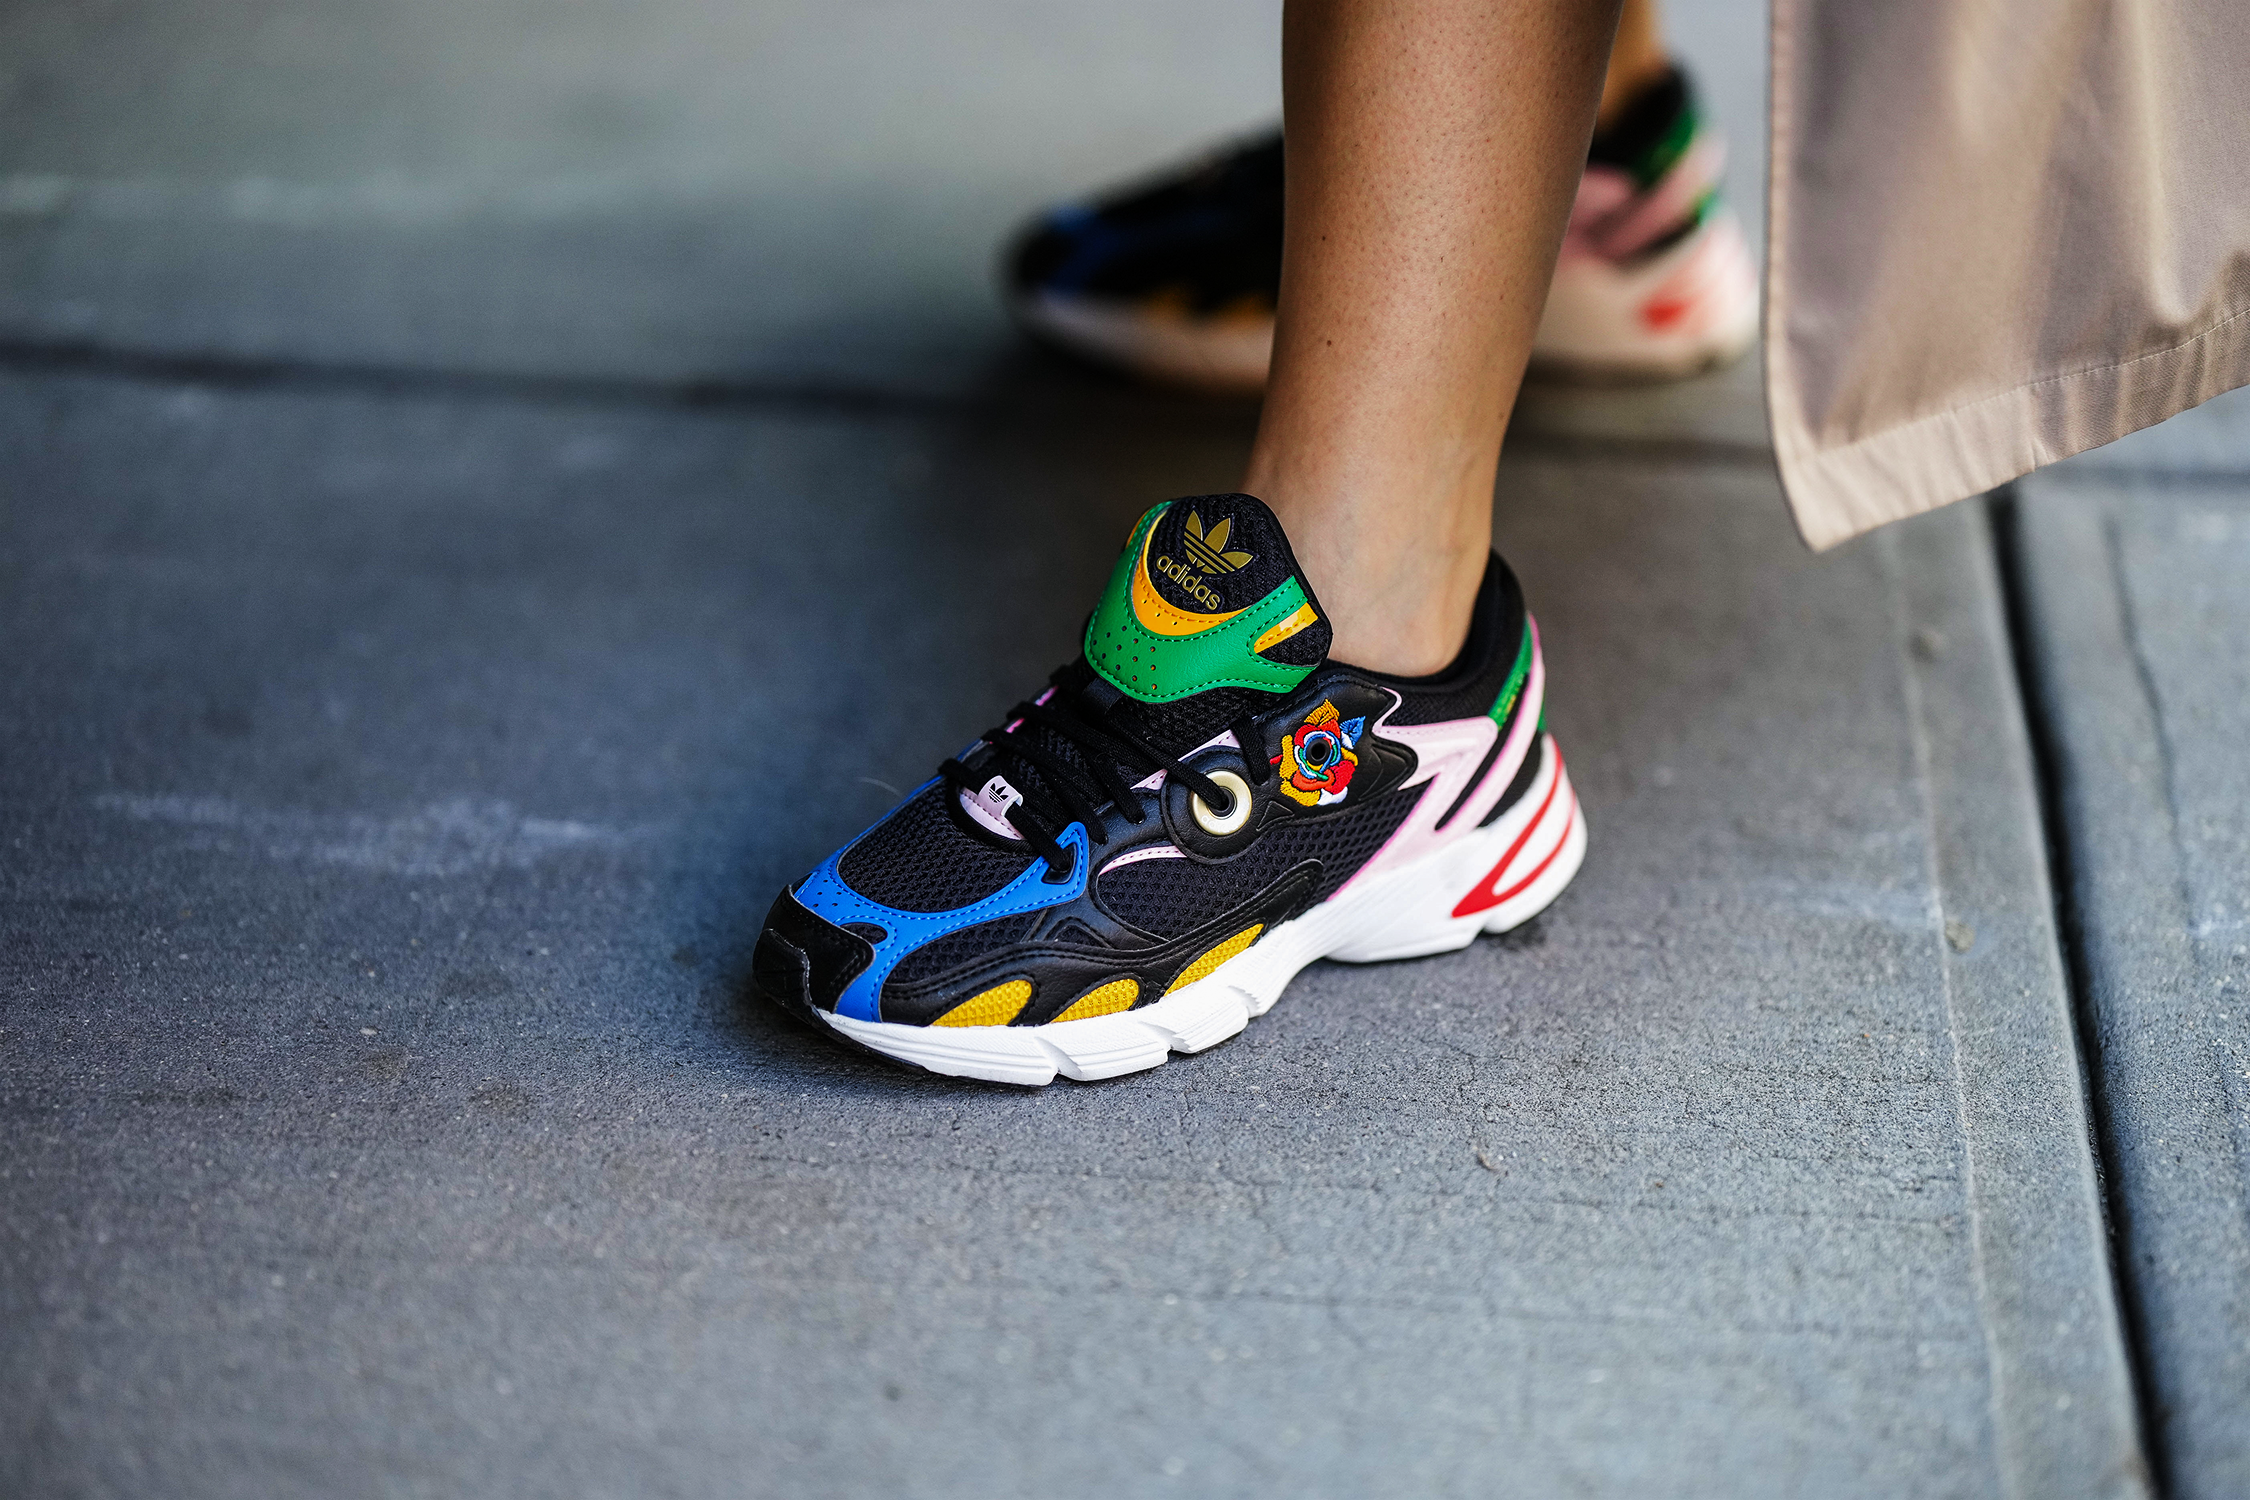 The Best Ugly Sneakers-How to Wear the Ugly Sneaker Trend